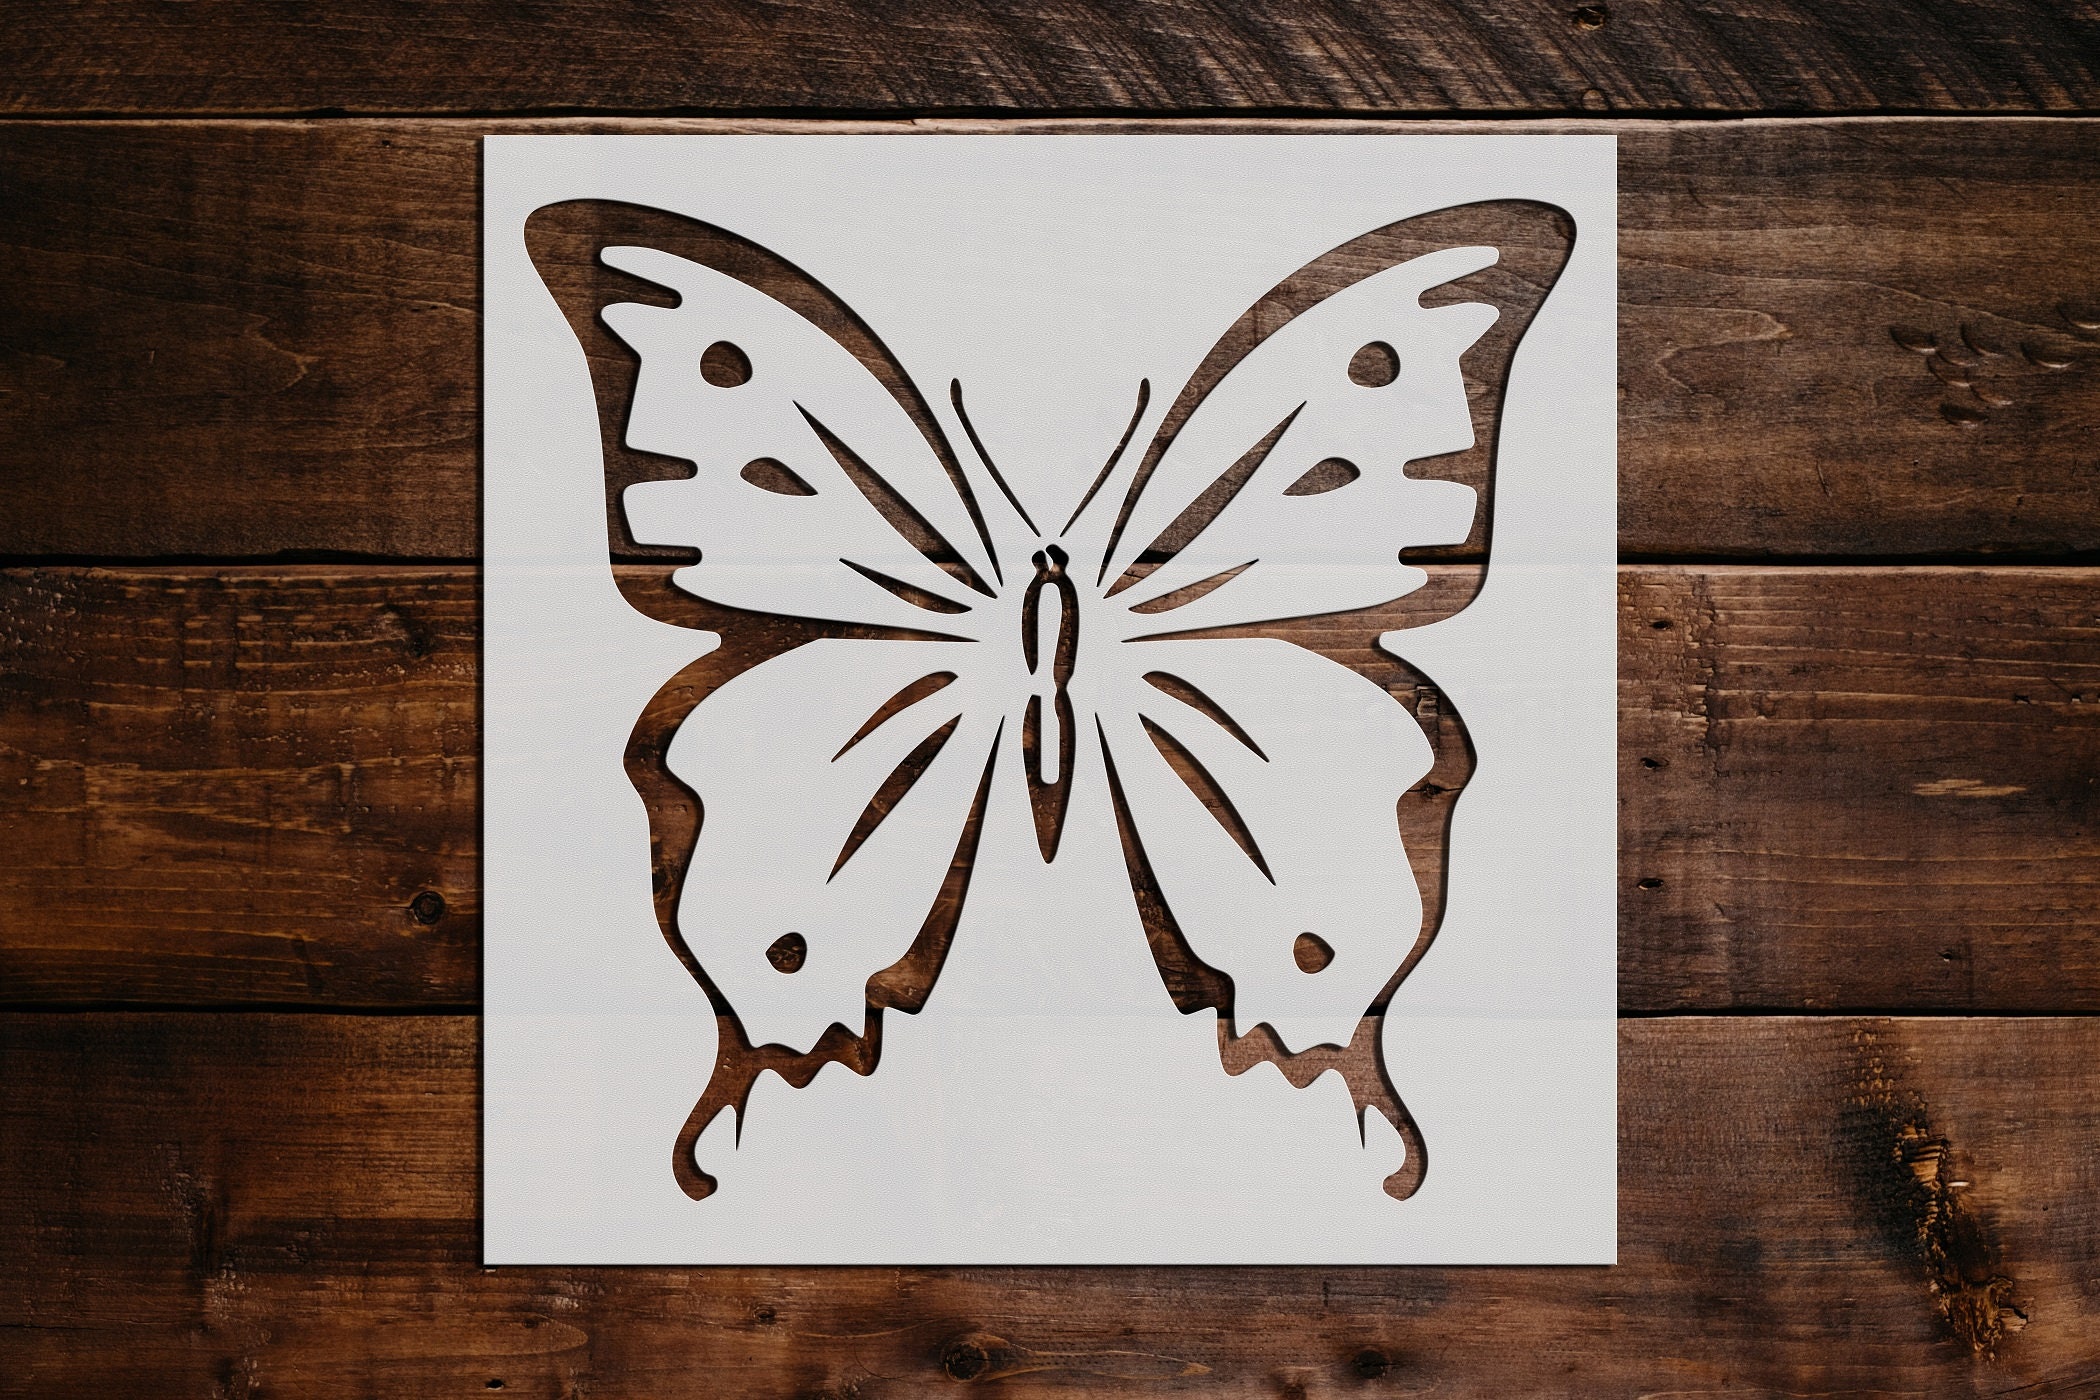  NBEADS Butterfly Stencil, Spring Butterfly Drawing Templates  Reusable Plastic Stencils DIY Art and Craft Stencils 11.8×11.8 Inch for  Painting on Wood Canvas Paper Furniture Wall : Arts, Crafts & Sewing